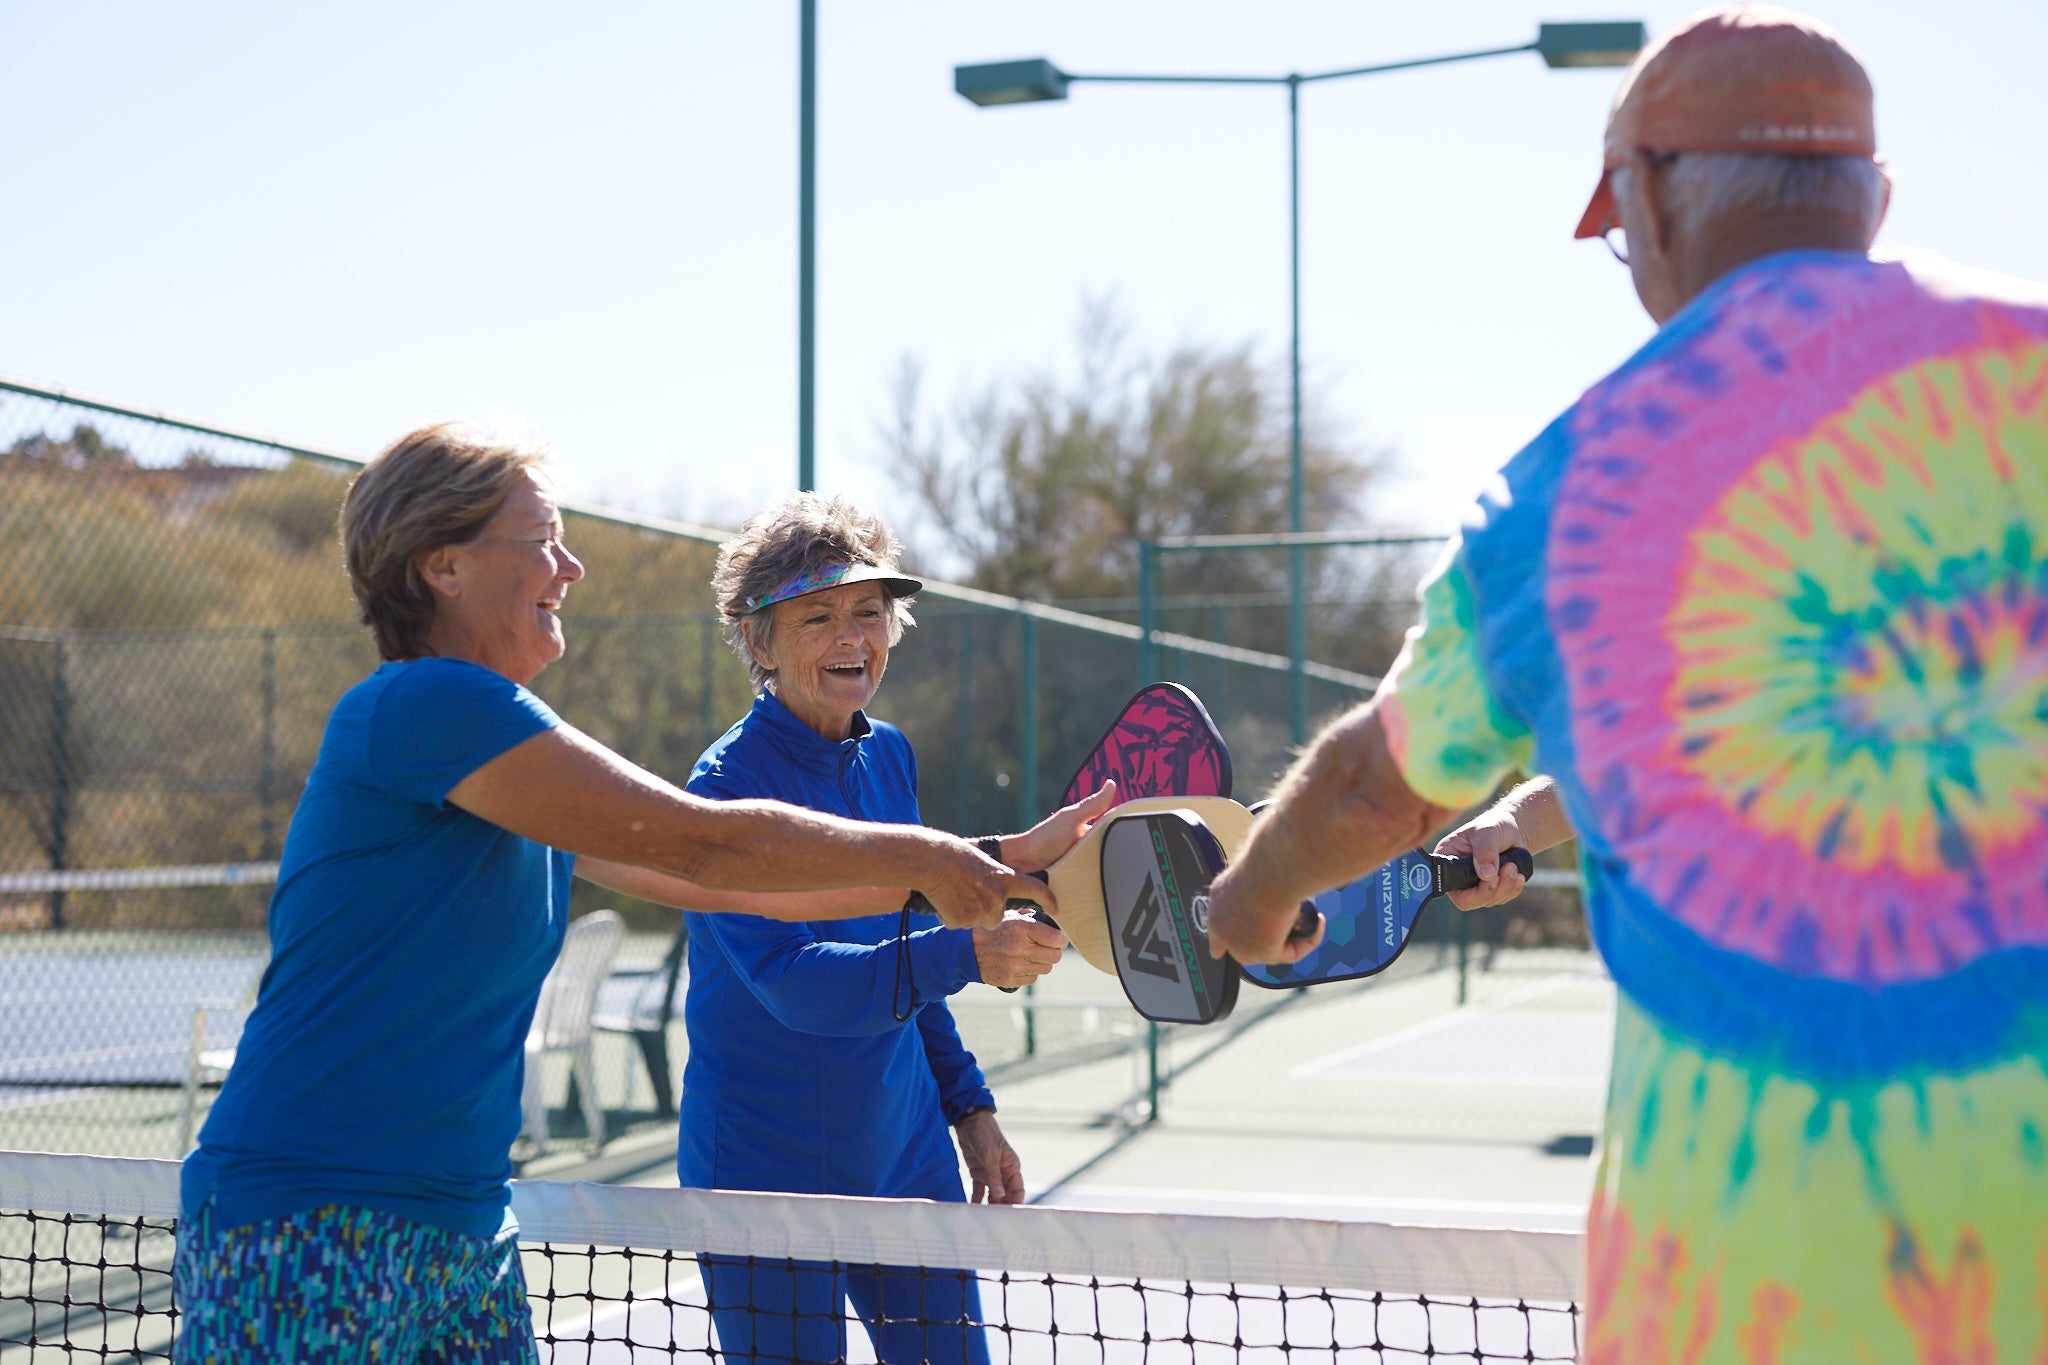 how to play pickleball 